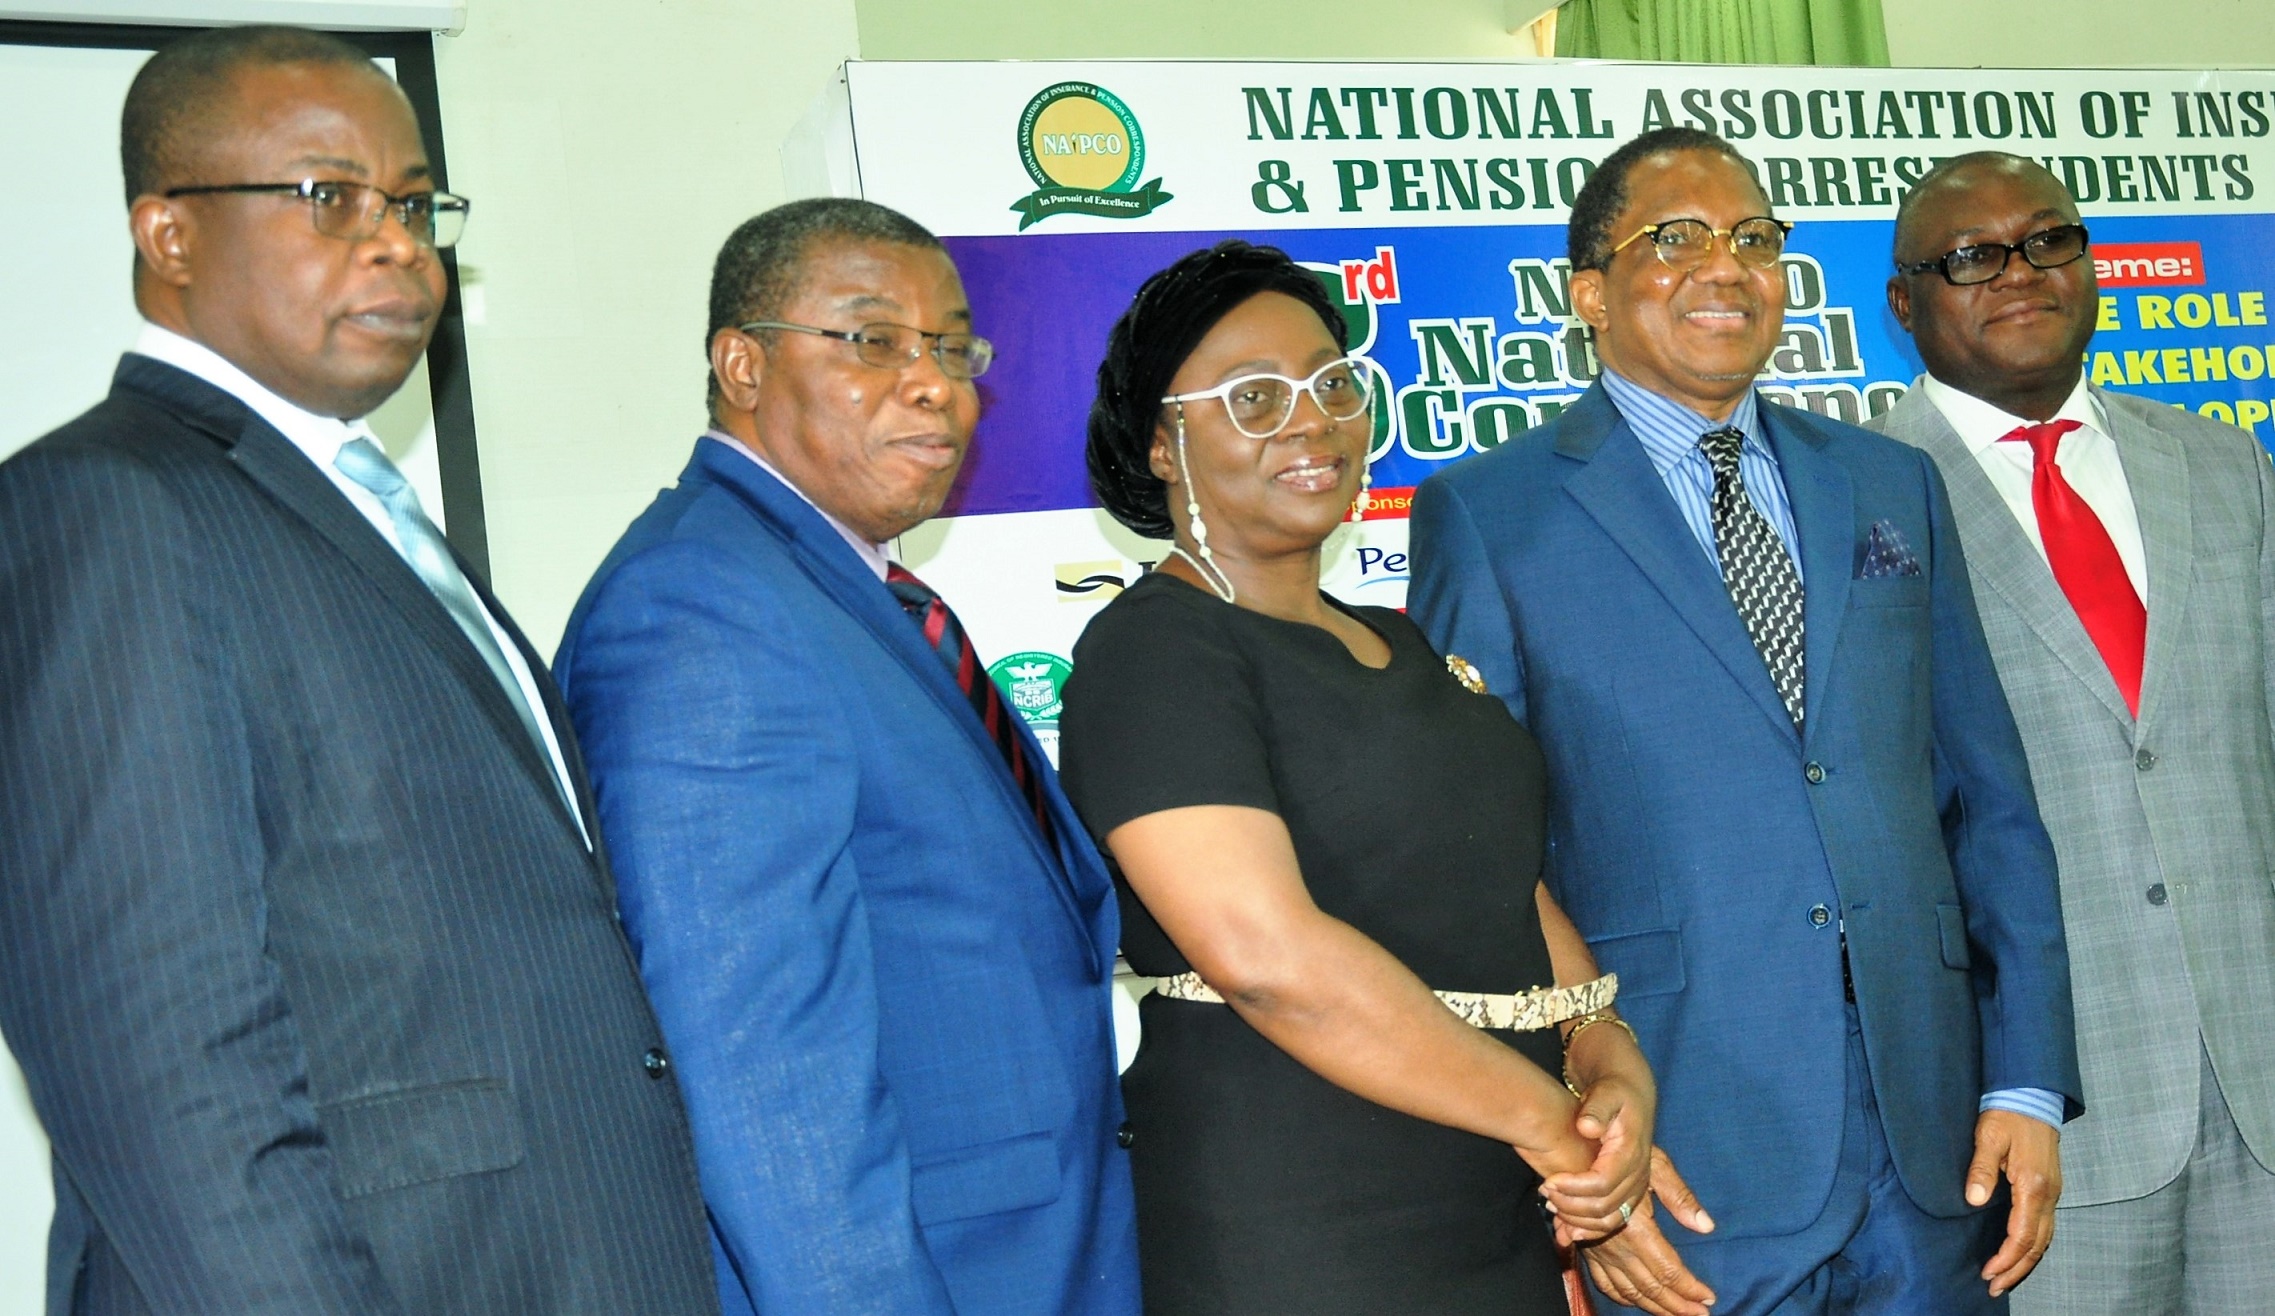 L-R: Mr. Lana Loyinmi, Head Contribution & Bond Redemption, National Pension Commission; Mr. George Onekhena, Deputy Commissioner, Finance and Administration, NAICOM; Mrs. Yetunde Ilori, Director General, Nigeria Insurers Association; Alhaji Bala Zakariya’u, past president, Chartered Insurance Institute of Nigeria and Chairman of occasion, and Mr Adebayo Adeleke, Managing Director, Lancelot Ventures Ltd, during the  3rd Annual National Conference of the National Association of Insurance and Pension Correspondents (NAIPCO) on The Role of Stakeholders in Developing Insurance and Pension Sectors held in Lagos on Thursday. August 09, 2018.   